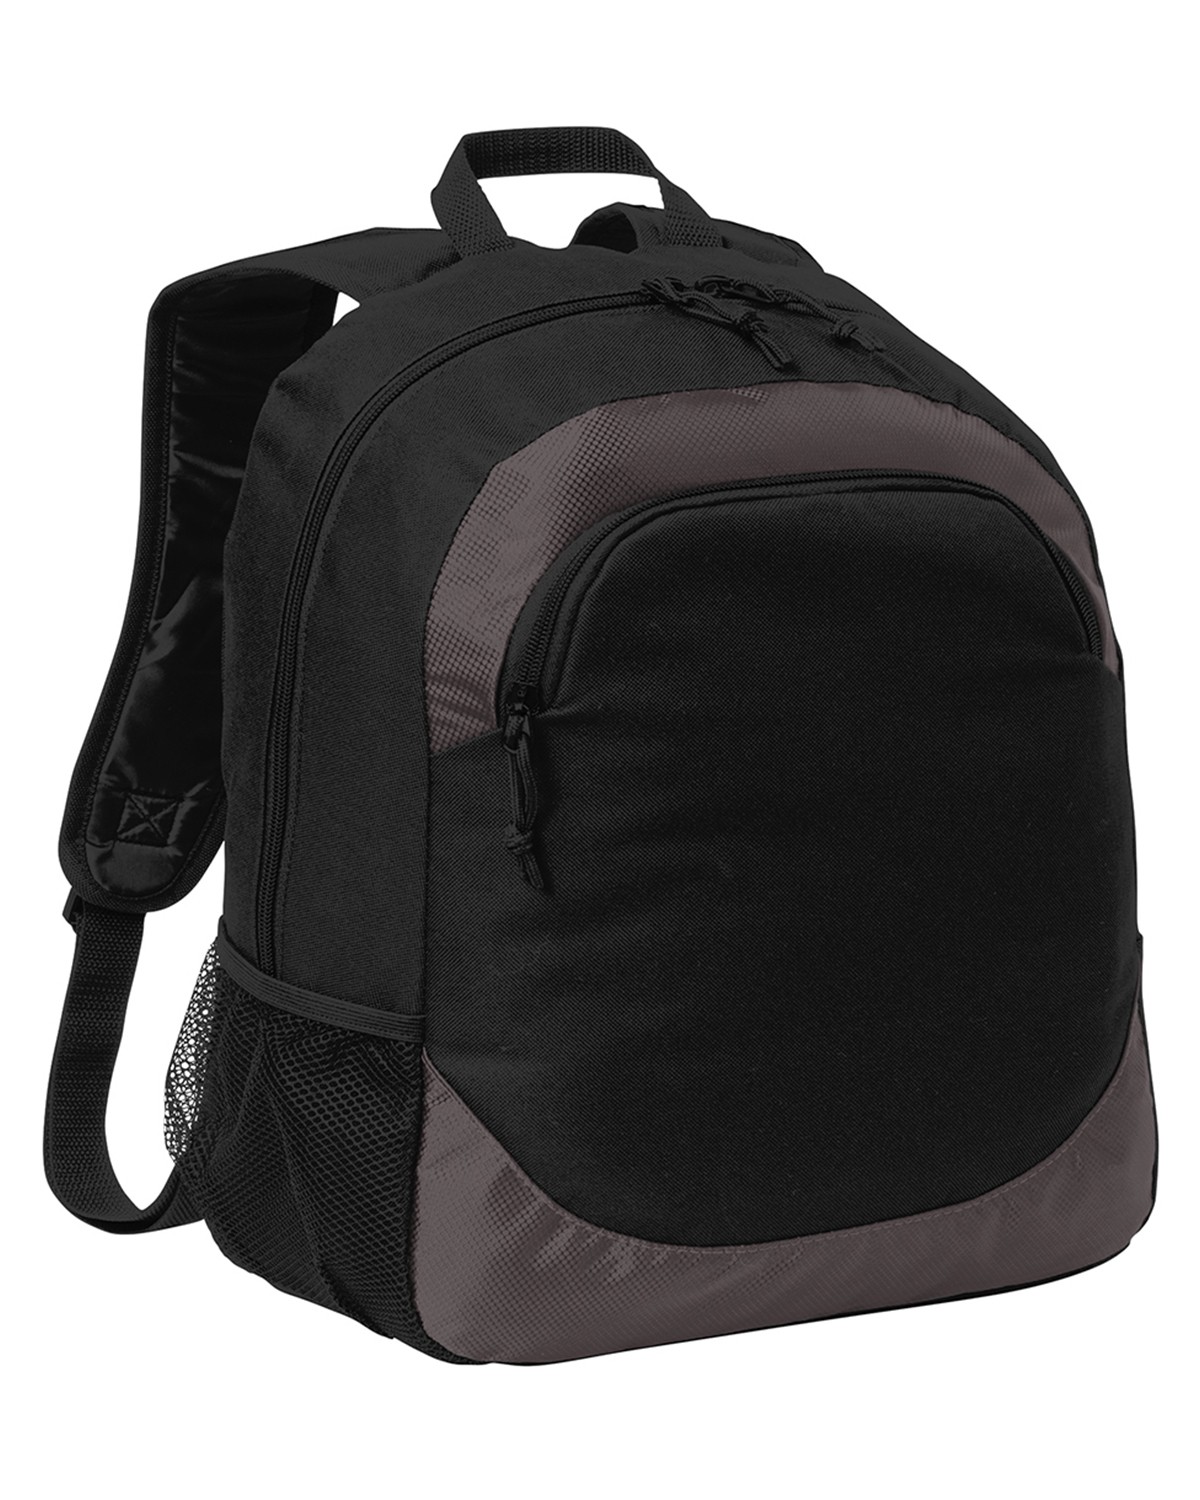 Port Authority Circuit Backpack